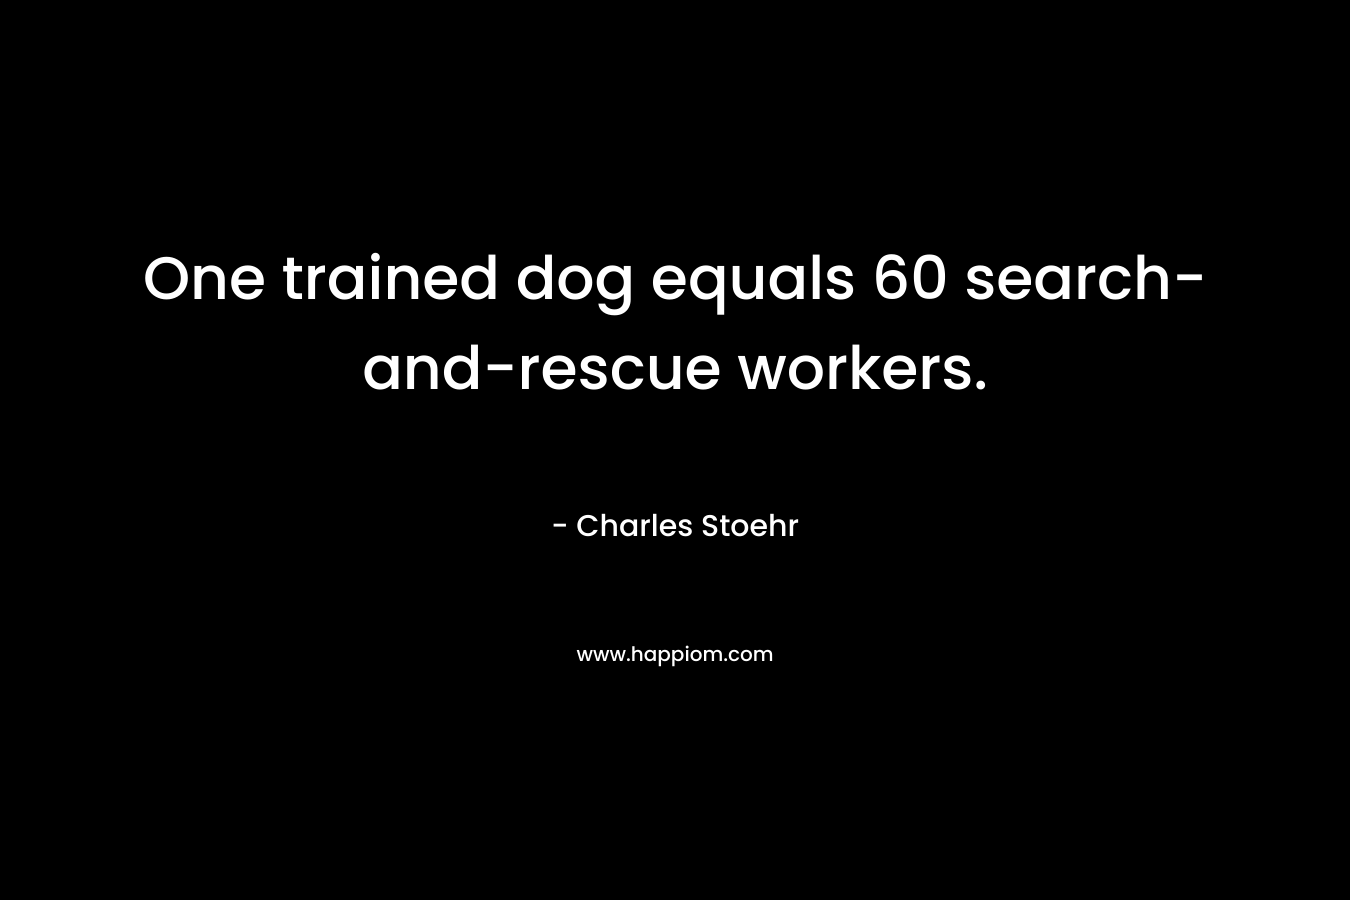 One trained dog equals 60 search-and-rescue workers. – Charles Stoehr